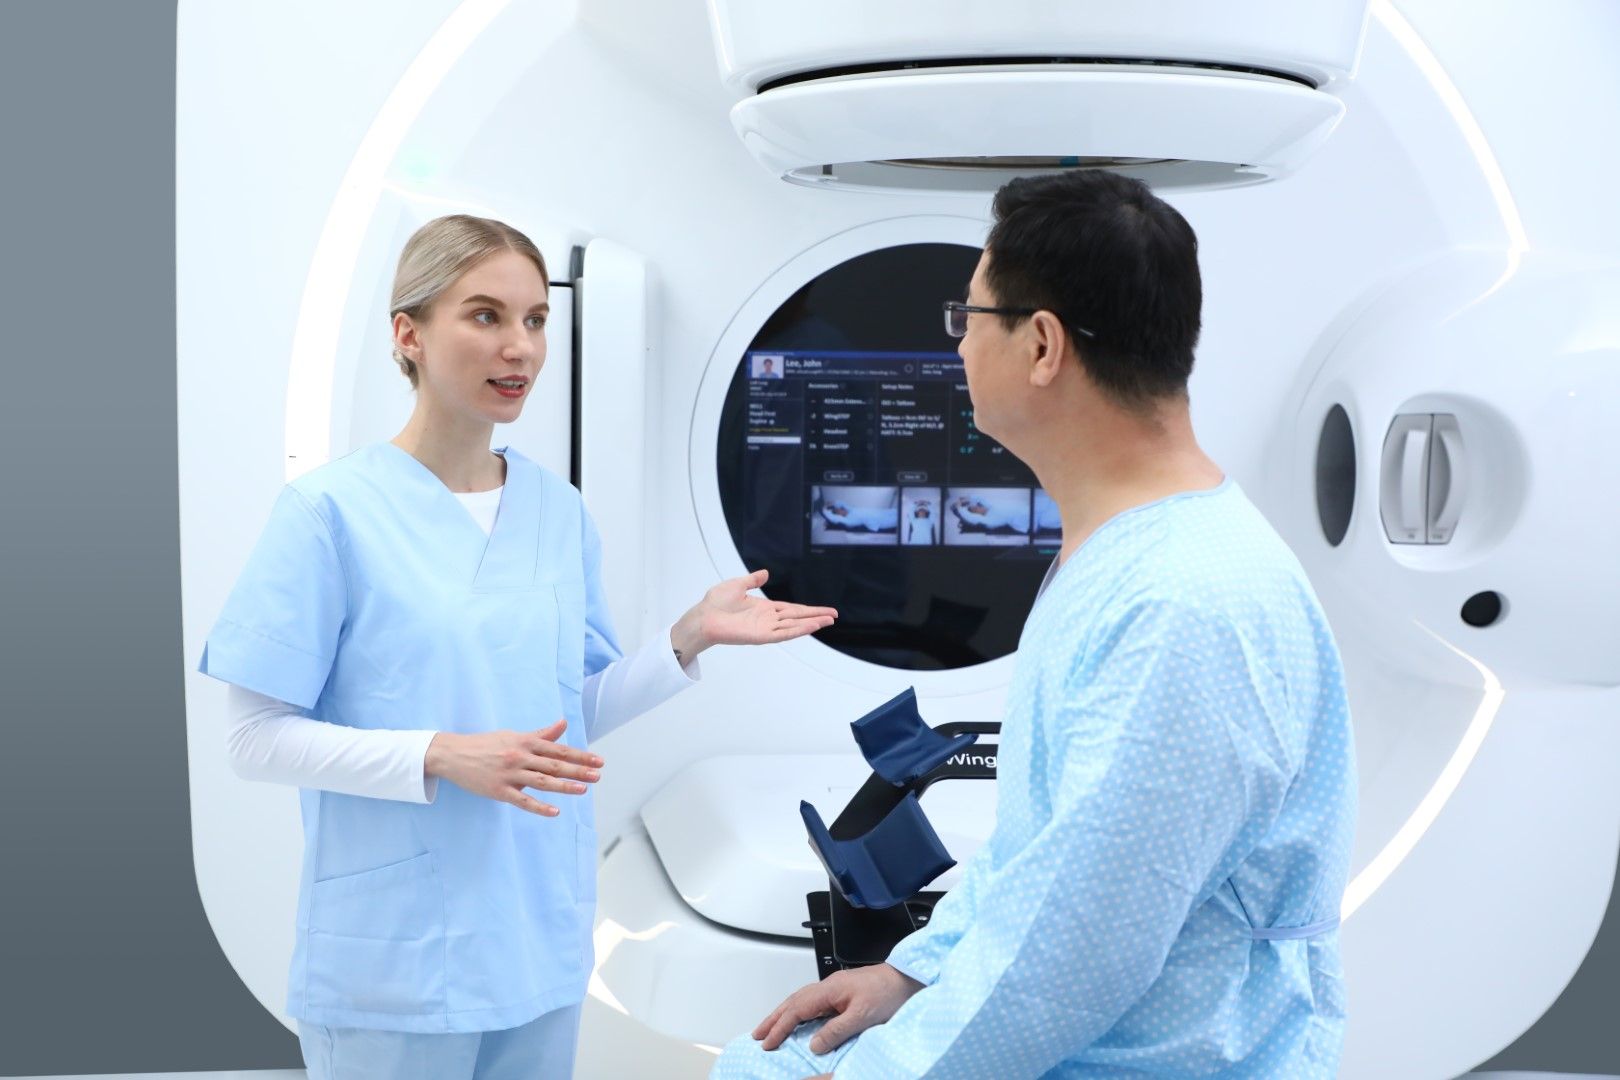 Cancer patients will have faster access to radiation treatment